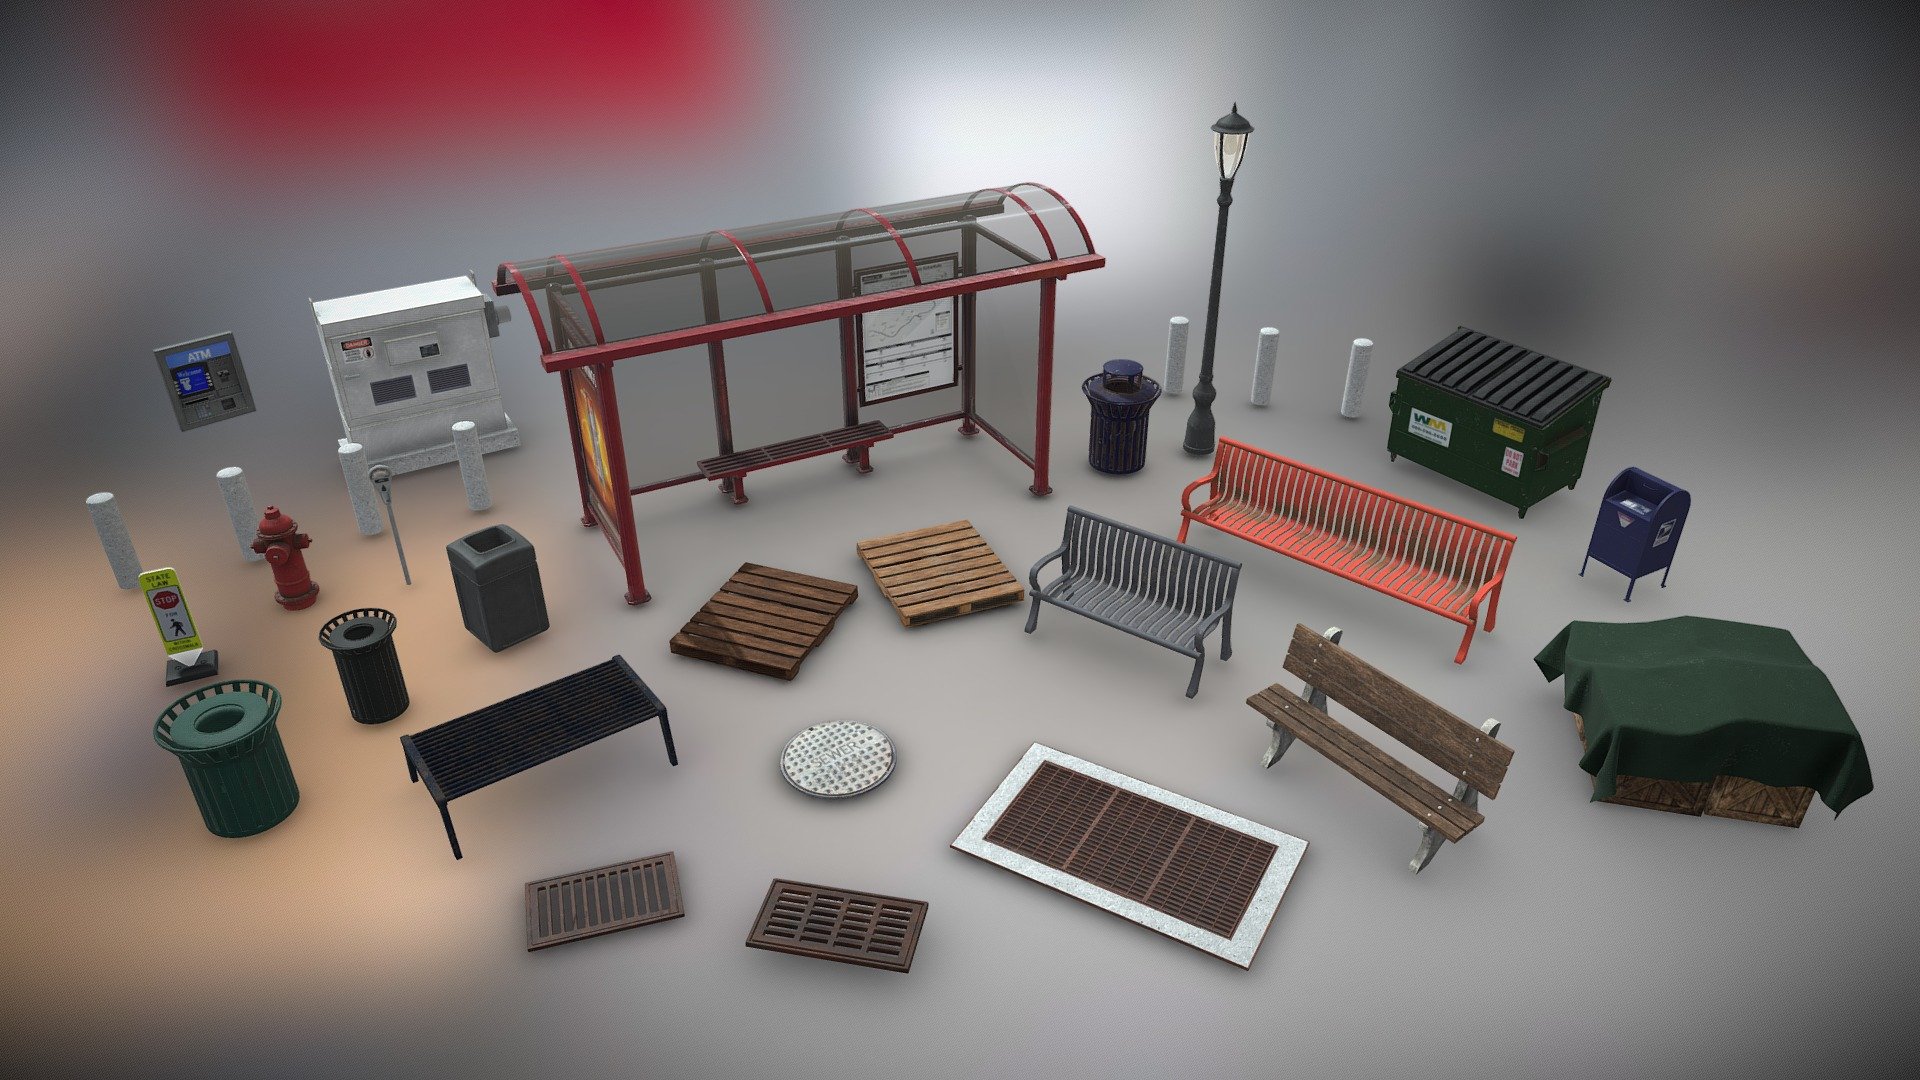 Assorted city props. Models are between 400 and 8000 triangles. Most models are PBR and include diffuse, occlusion roughness metallic, emissive, normal, (alpha/opacity if needed) maps.

Both sides of dumpster lid opens. Search for and check out my dumpster model for 4 other texture options to change the look of this dumpster model. 

Some other models have multipule material options including the bus stop, benches, pallets, crates.




Bus Stop

ATM

Dumpster

USPS Mailbox

Utility Box

Street Light

Trash Cans

Fire Hydrant

Benches

Storm Drain

Manhole Cover

Pallet

Tarp Covering Crates

Parking Meter

Free to use for any project. Any feedback is appreciated. Thanks for checking out my models and the likes. 




Check out all my other models including this most recent model.
 - City Props Collection - Download Free 3D model by TampaJoey 3d model